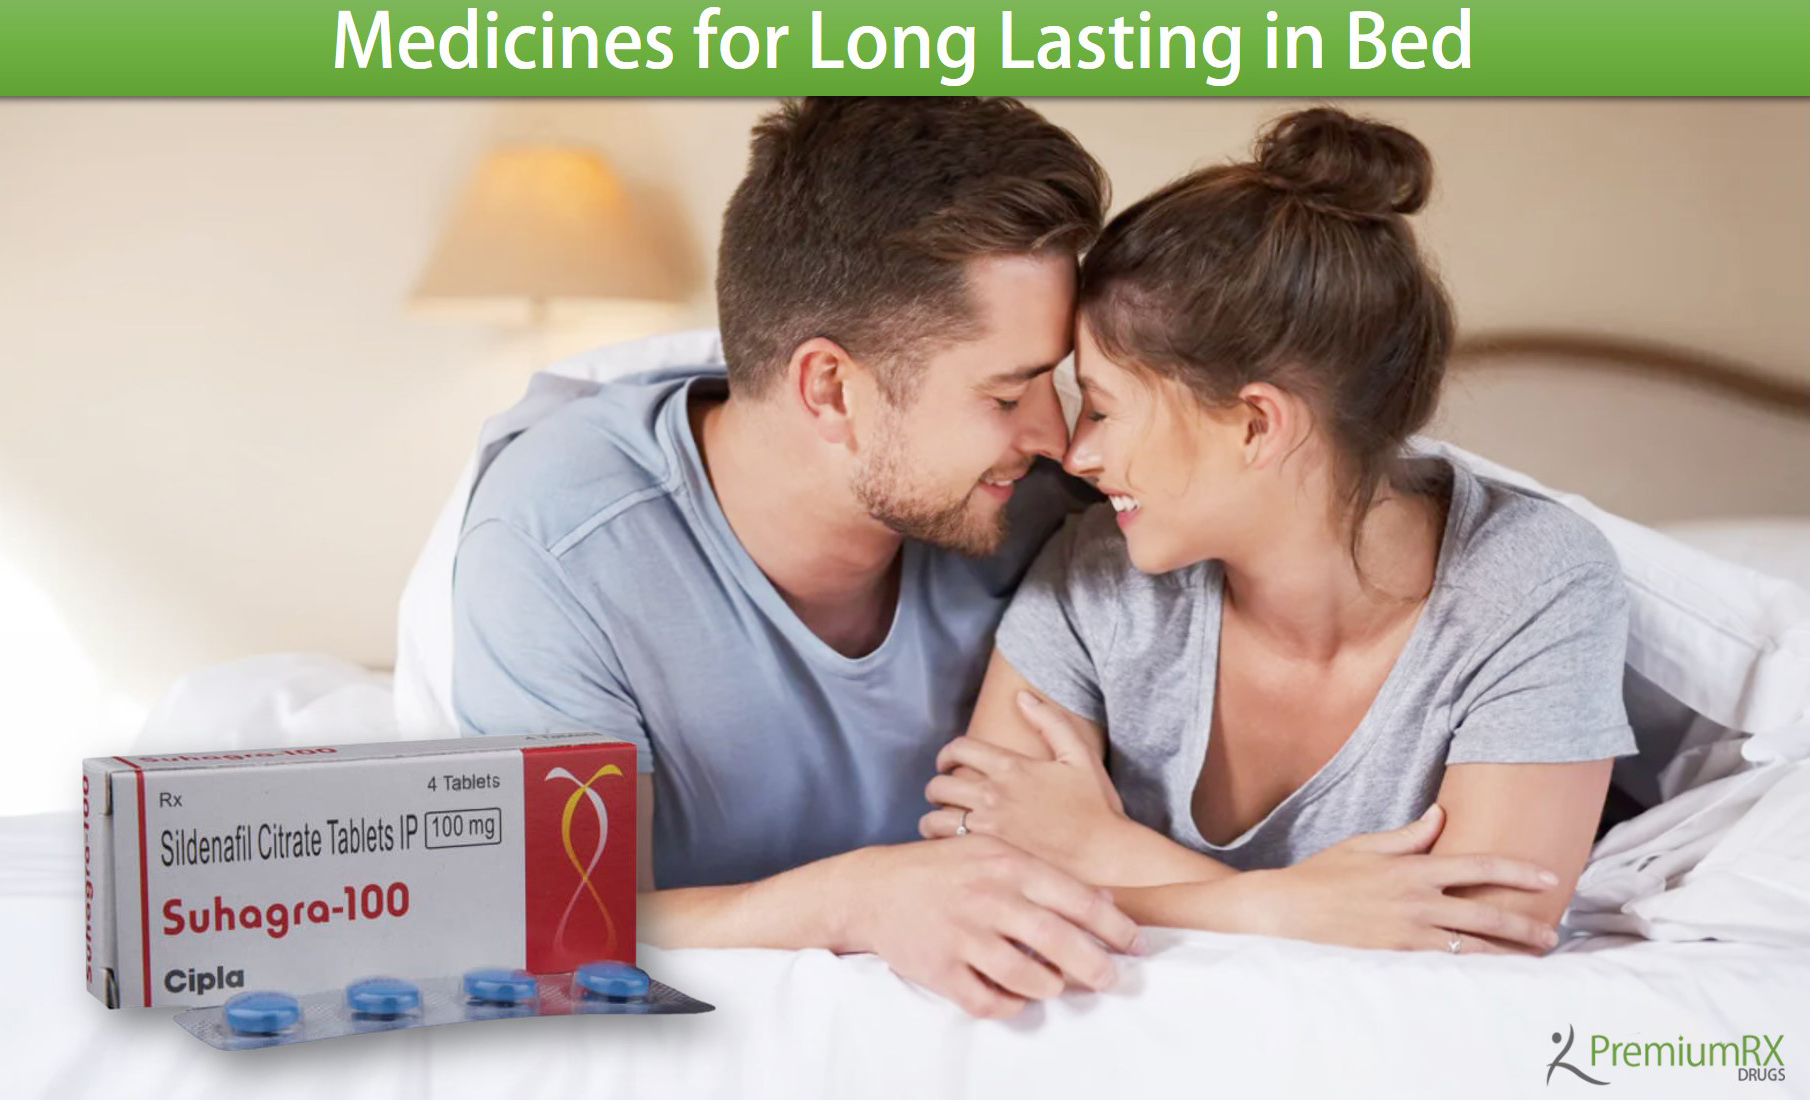 Medicines for Long Lasting in Bed